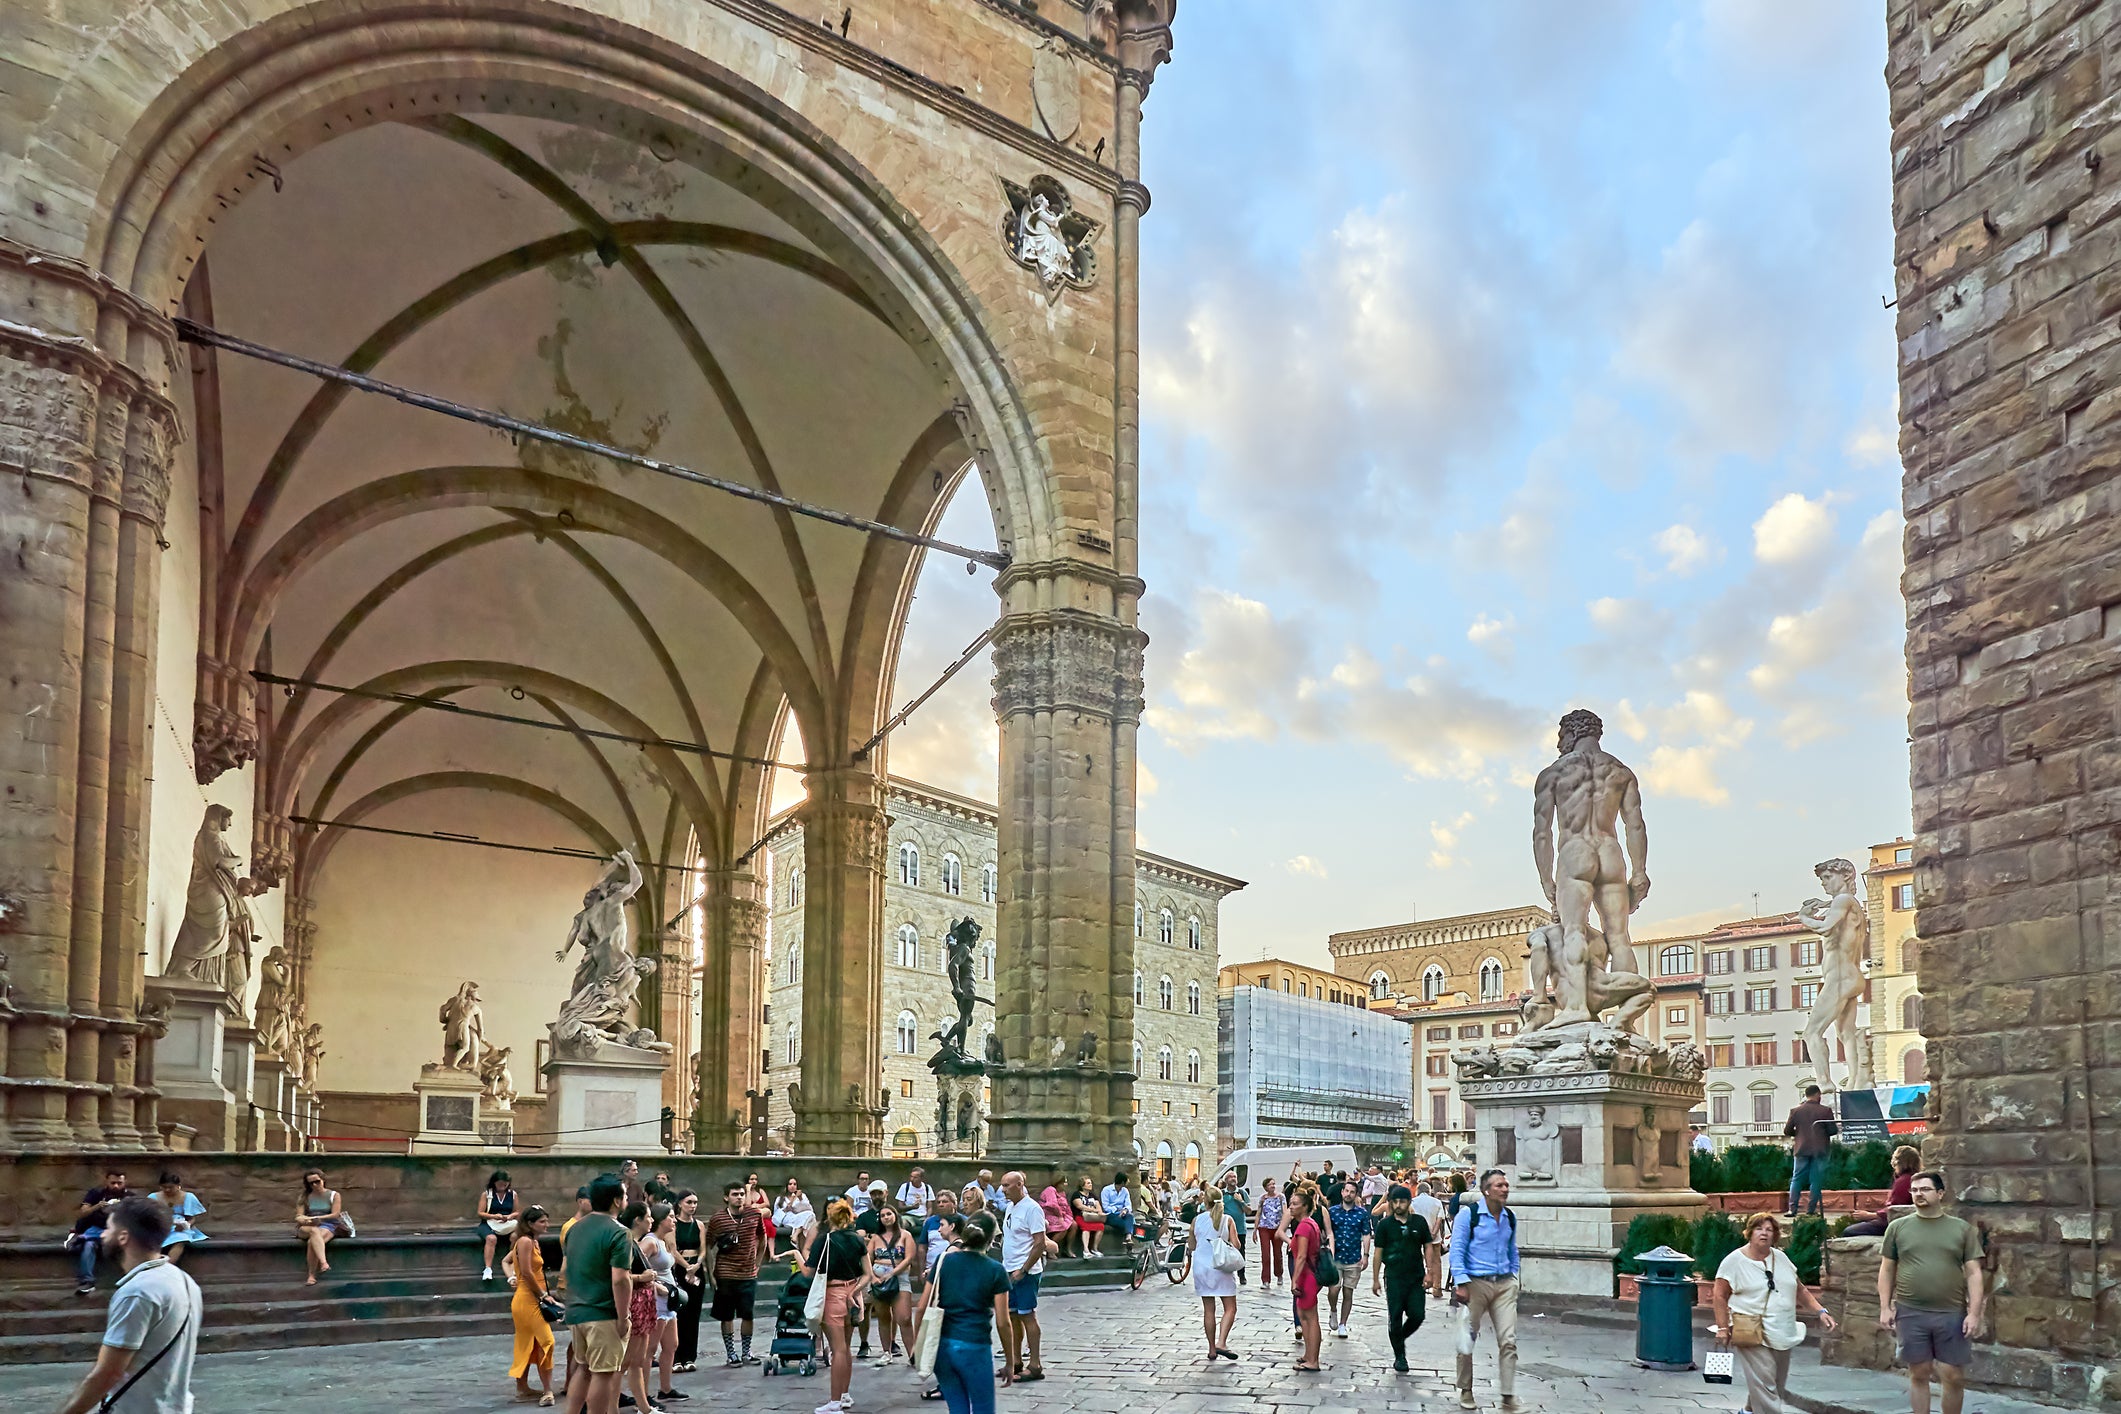 Florence has 11,000 holiday lets across the city